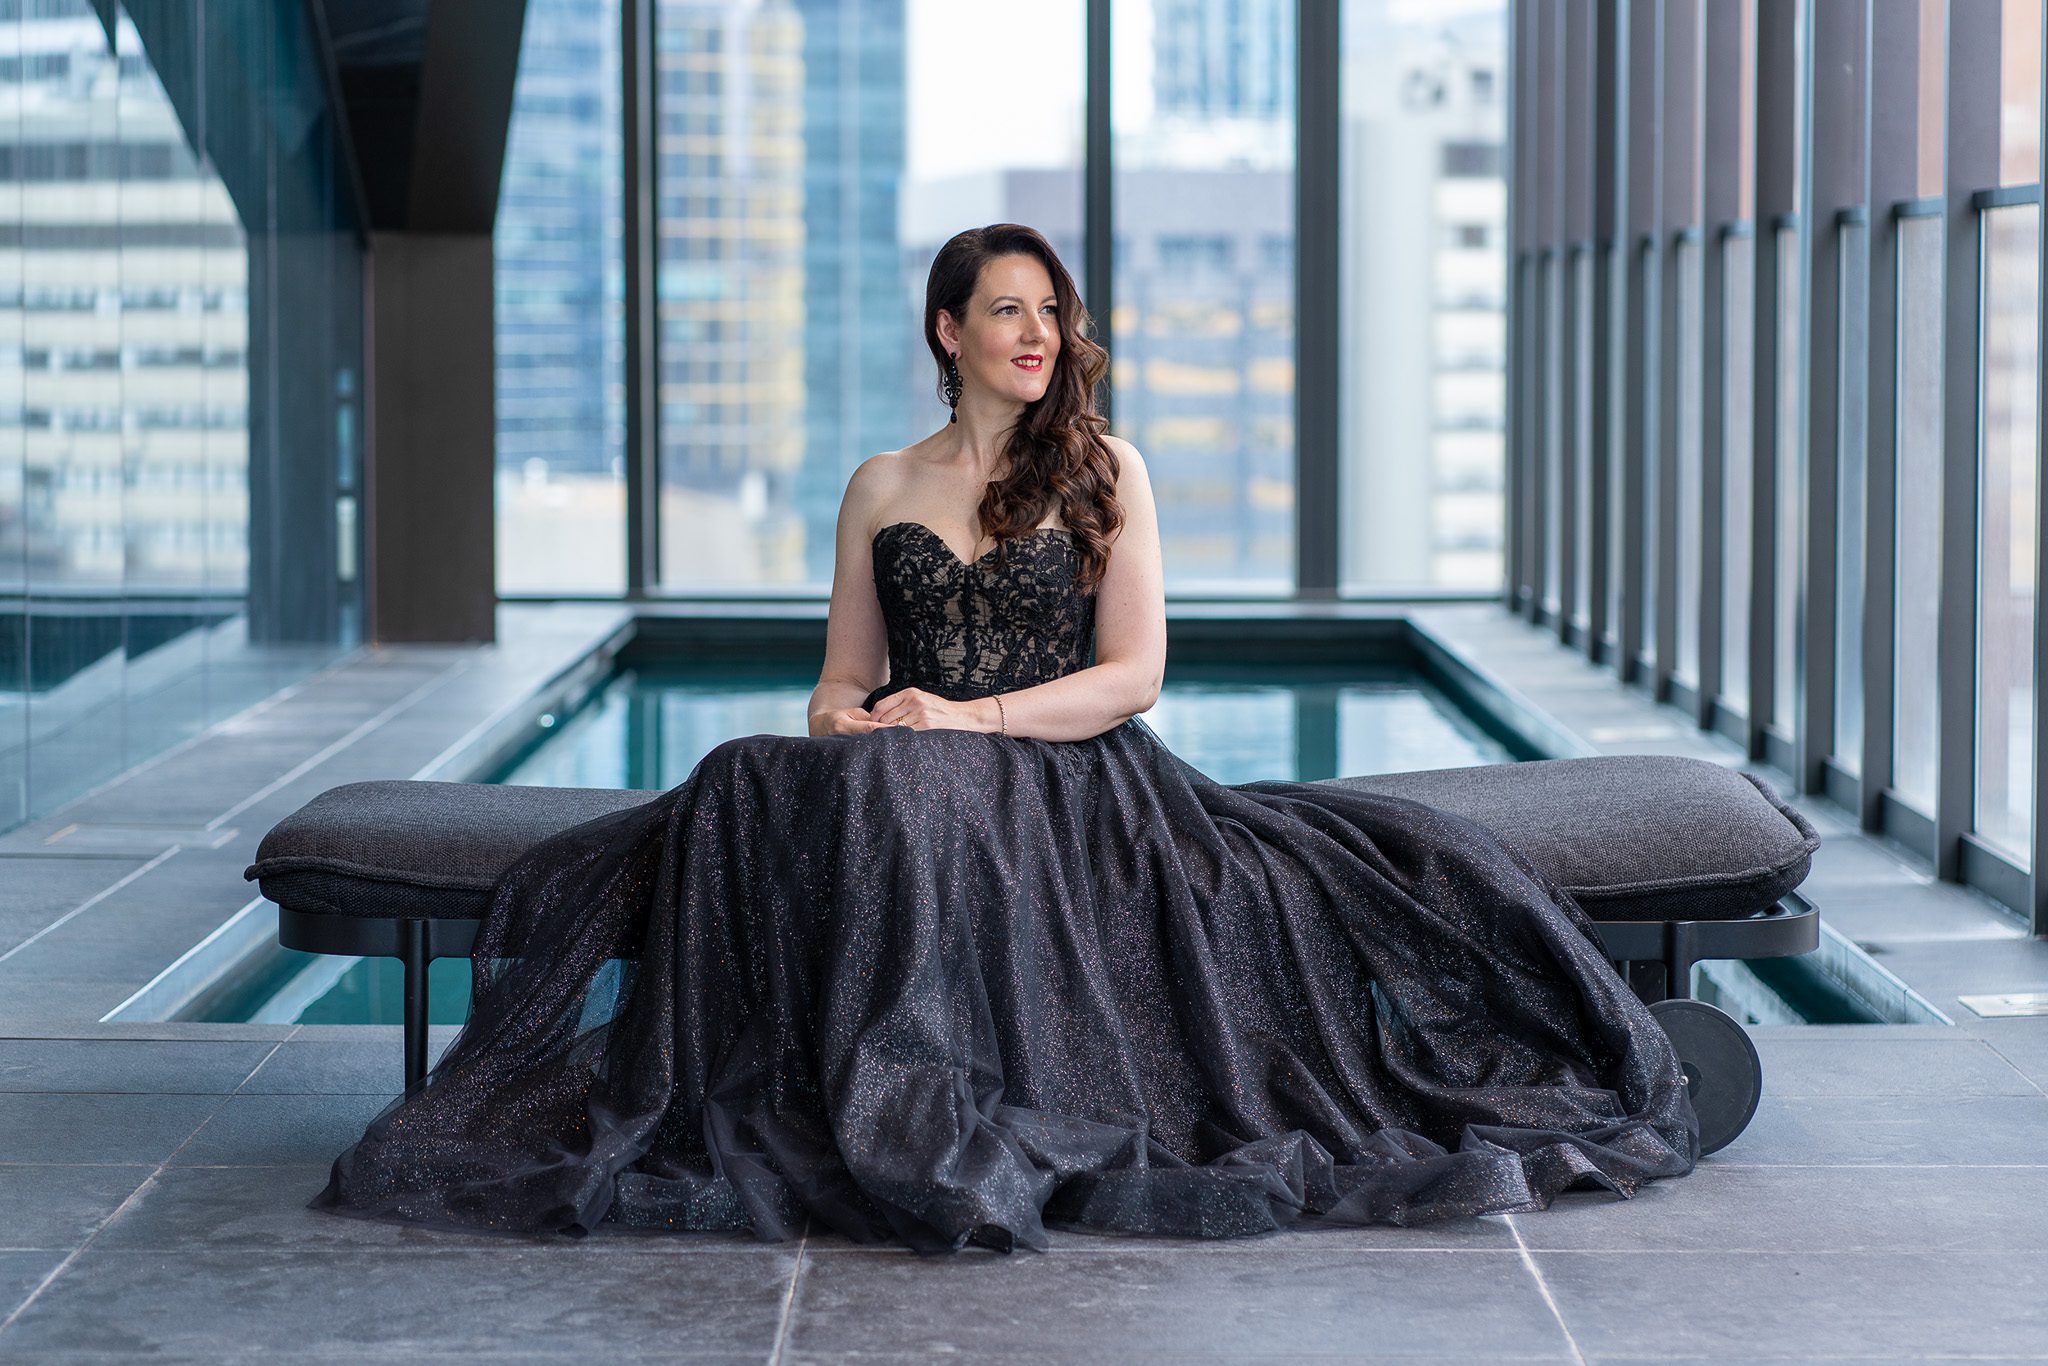 long dark-haired woman wearing a long black formal gown and sitting on a bench in a hotel pool area while she is photographed for the portraits page